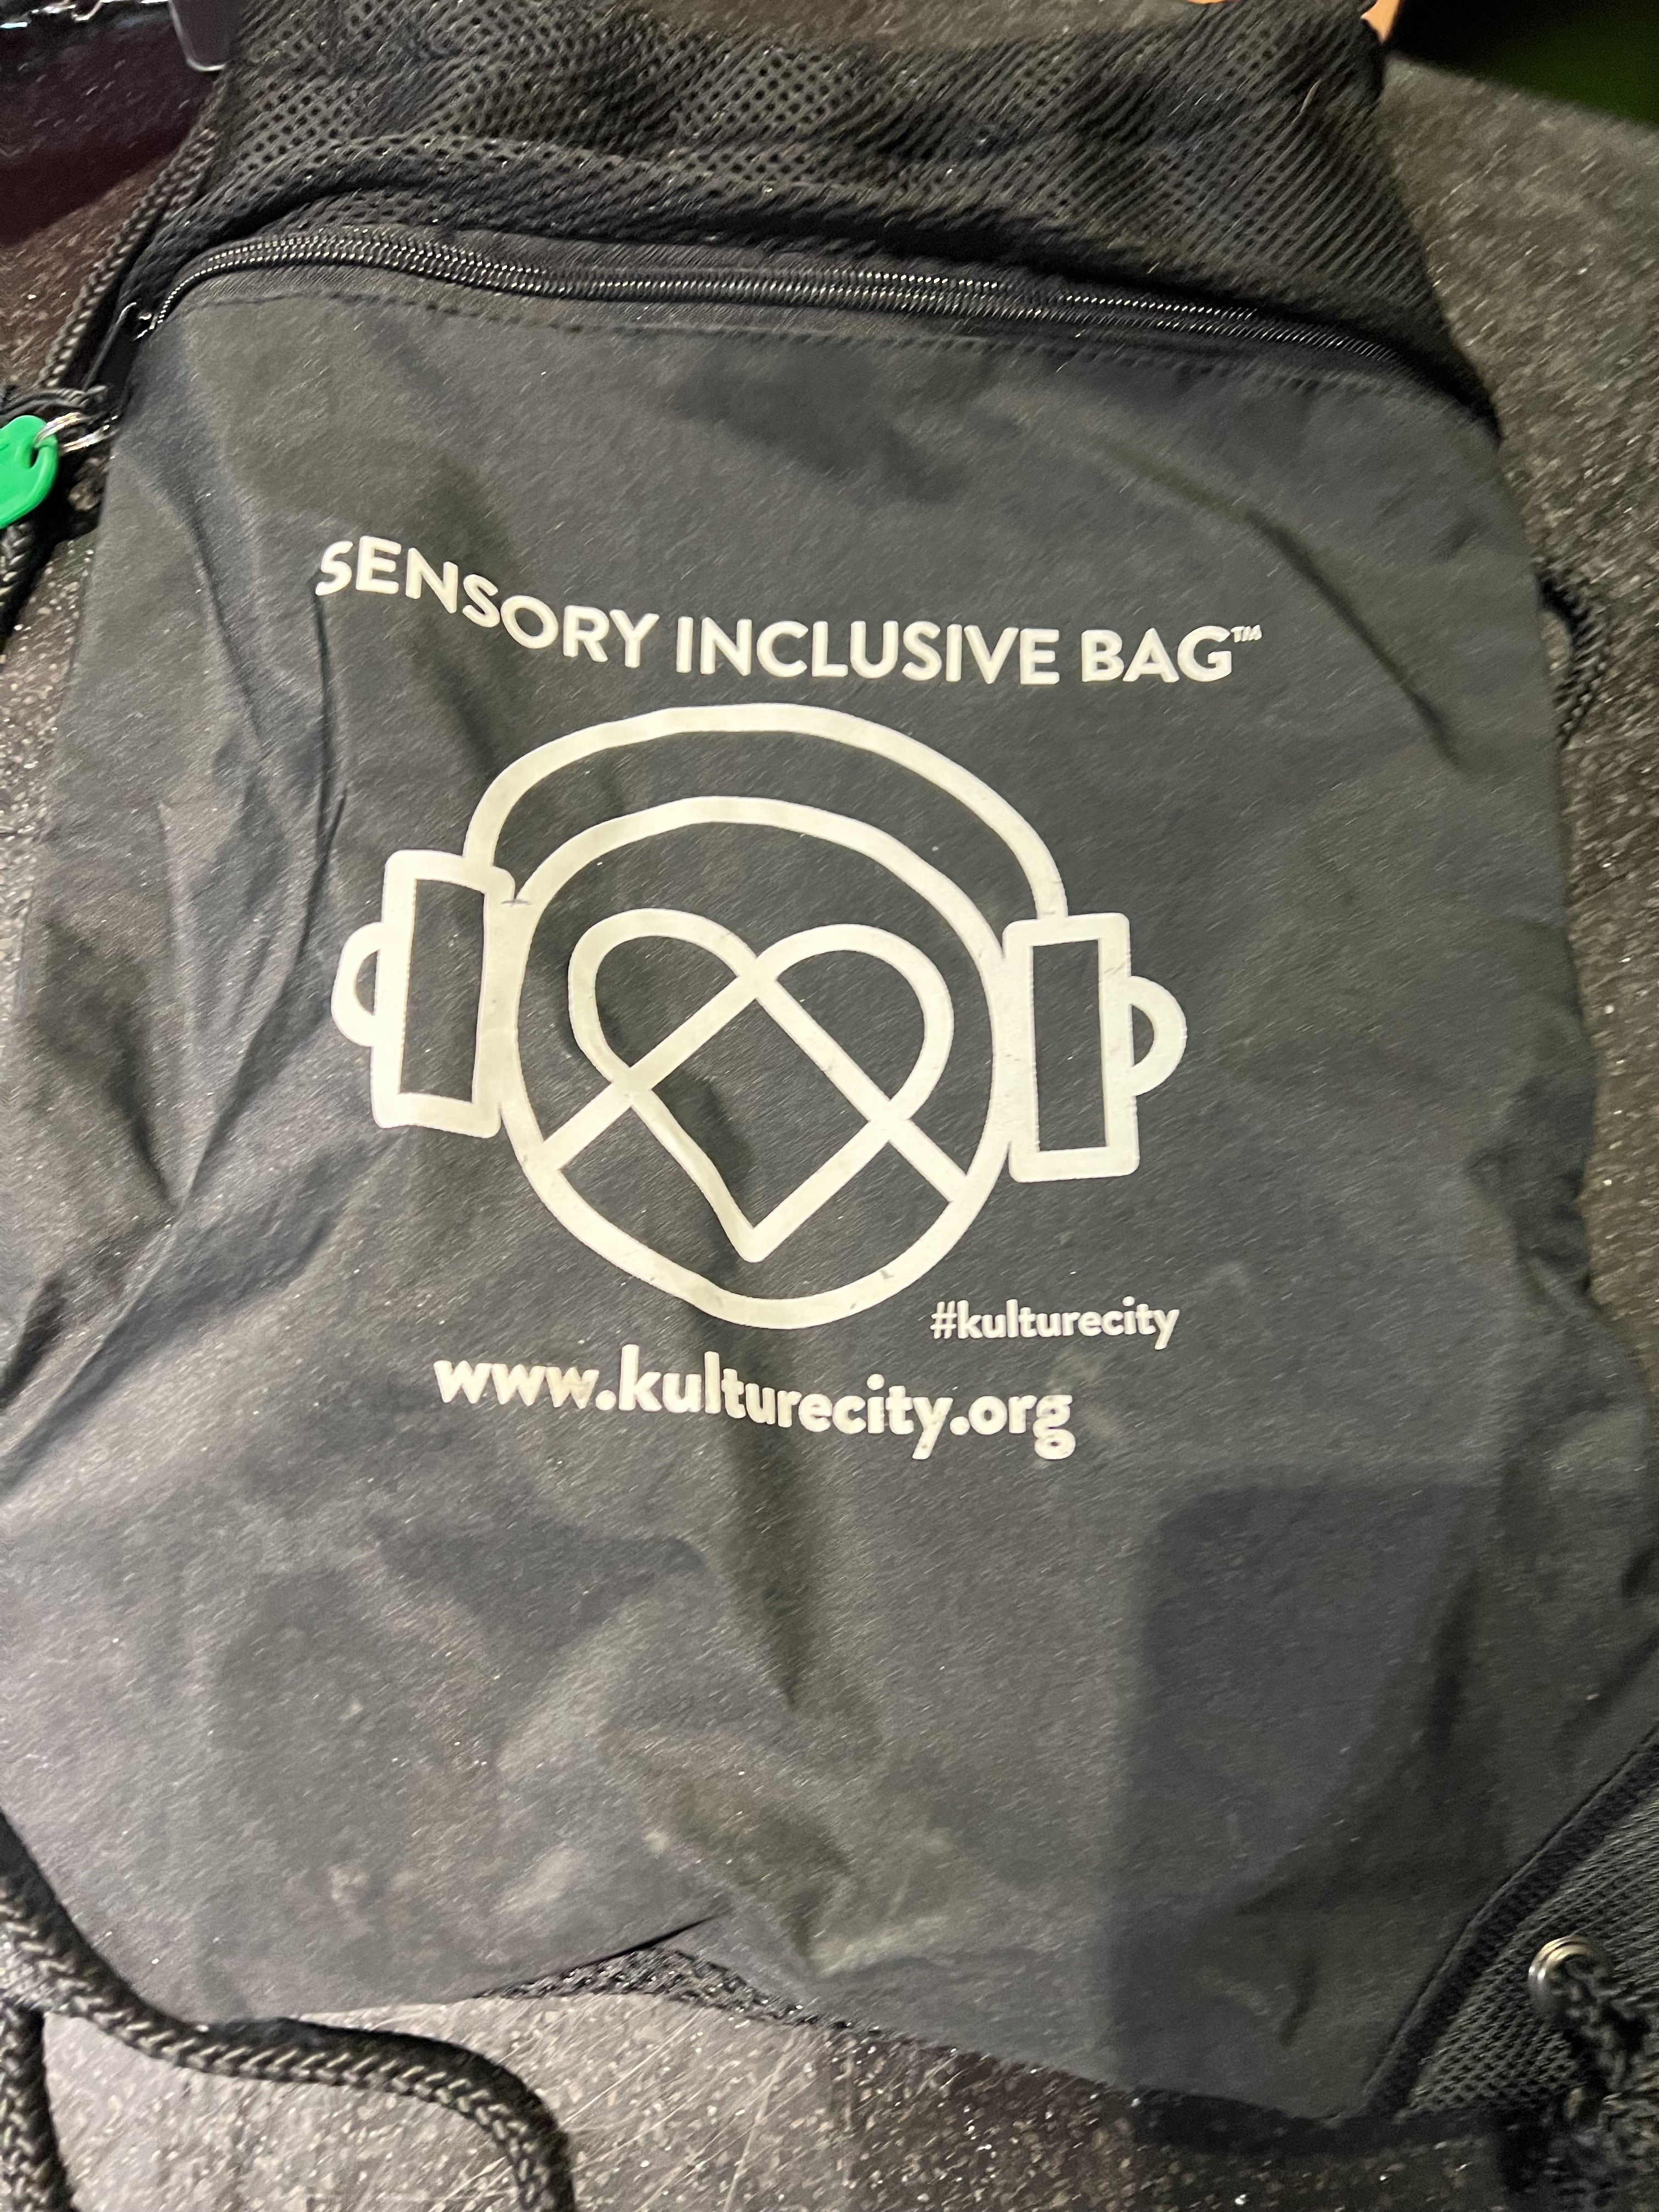 File:Sensory inclusive bag for people with sensory processing   - Wikipedia